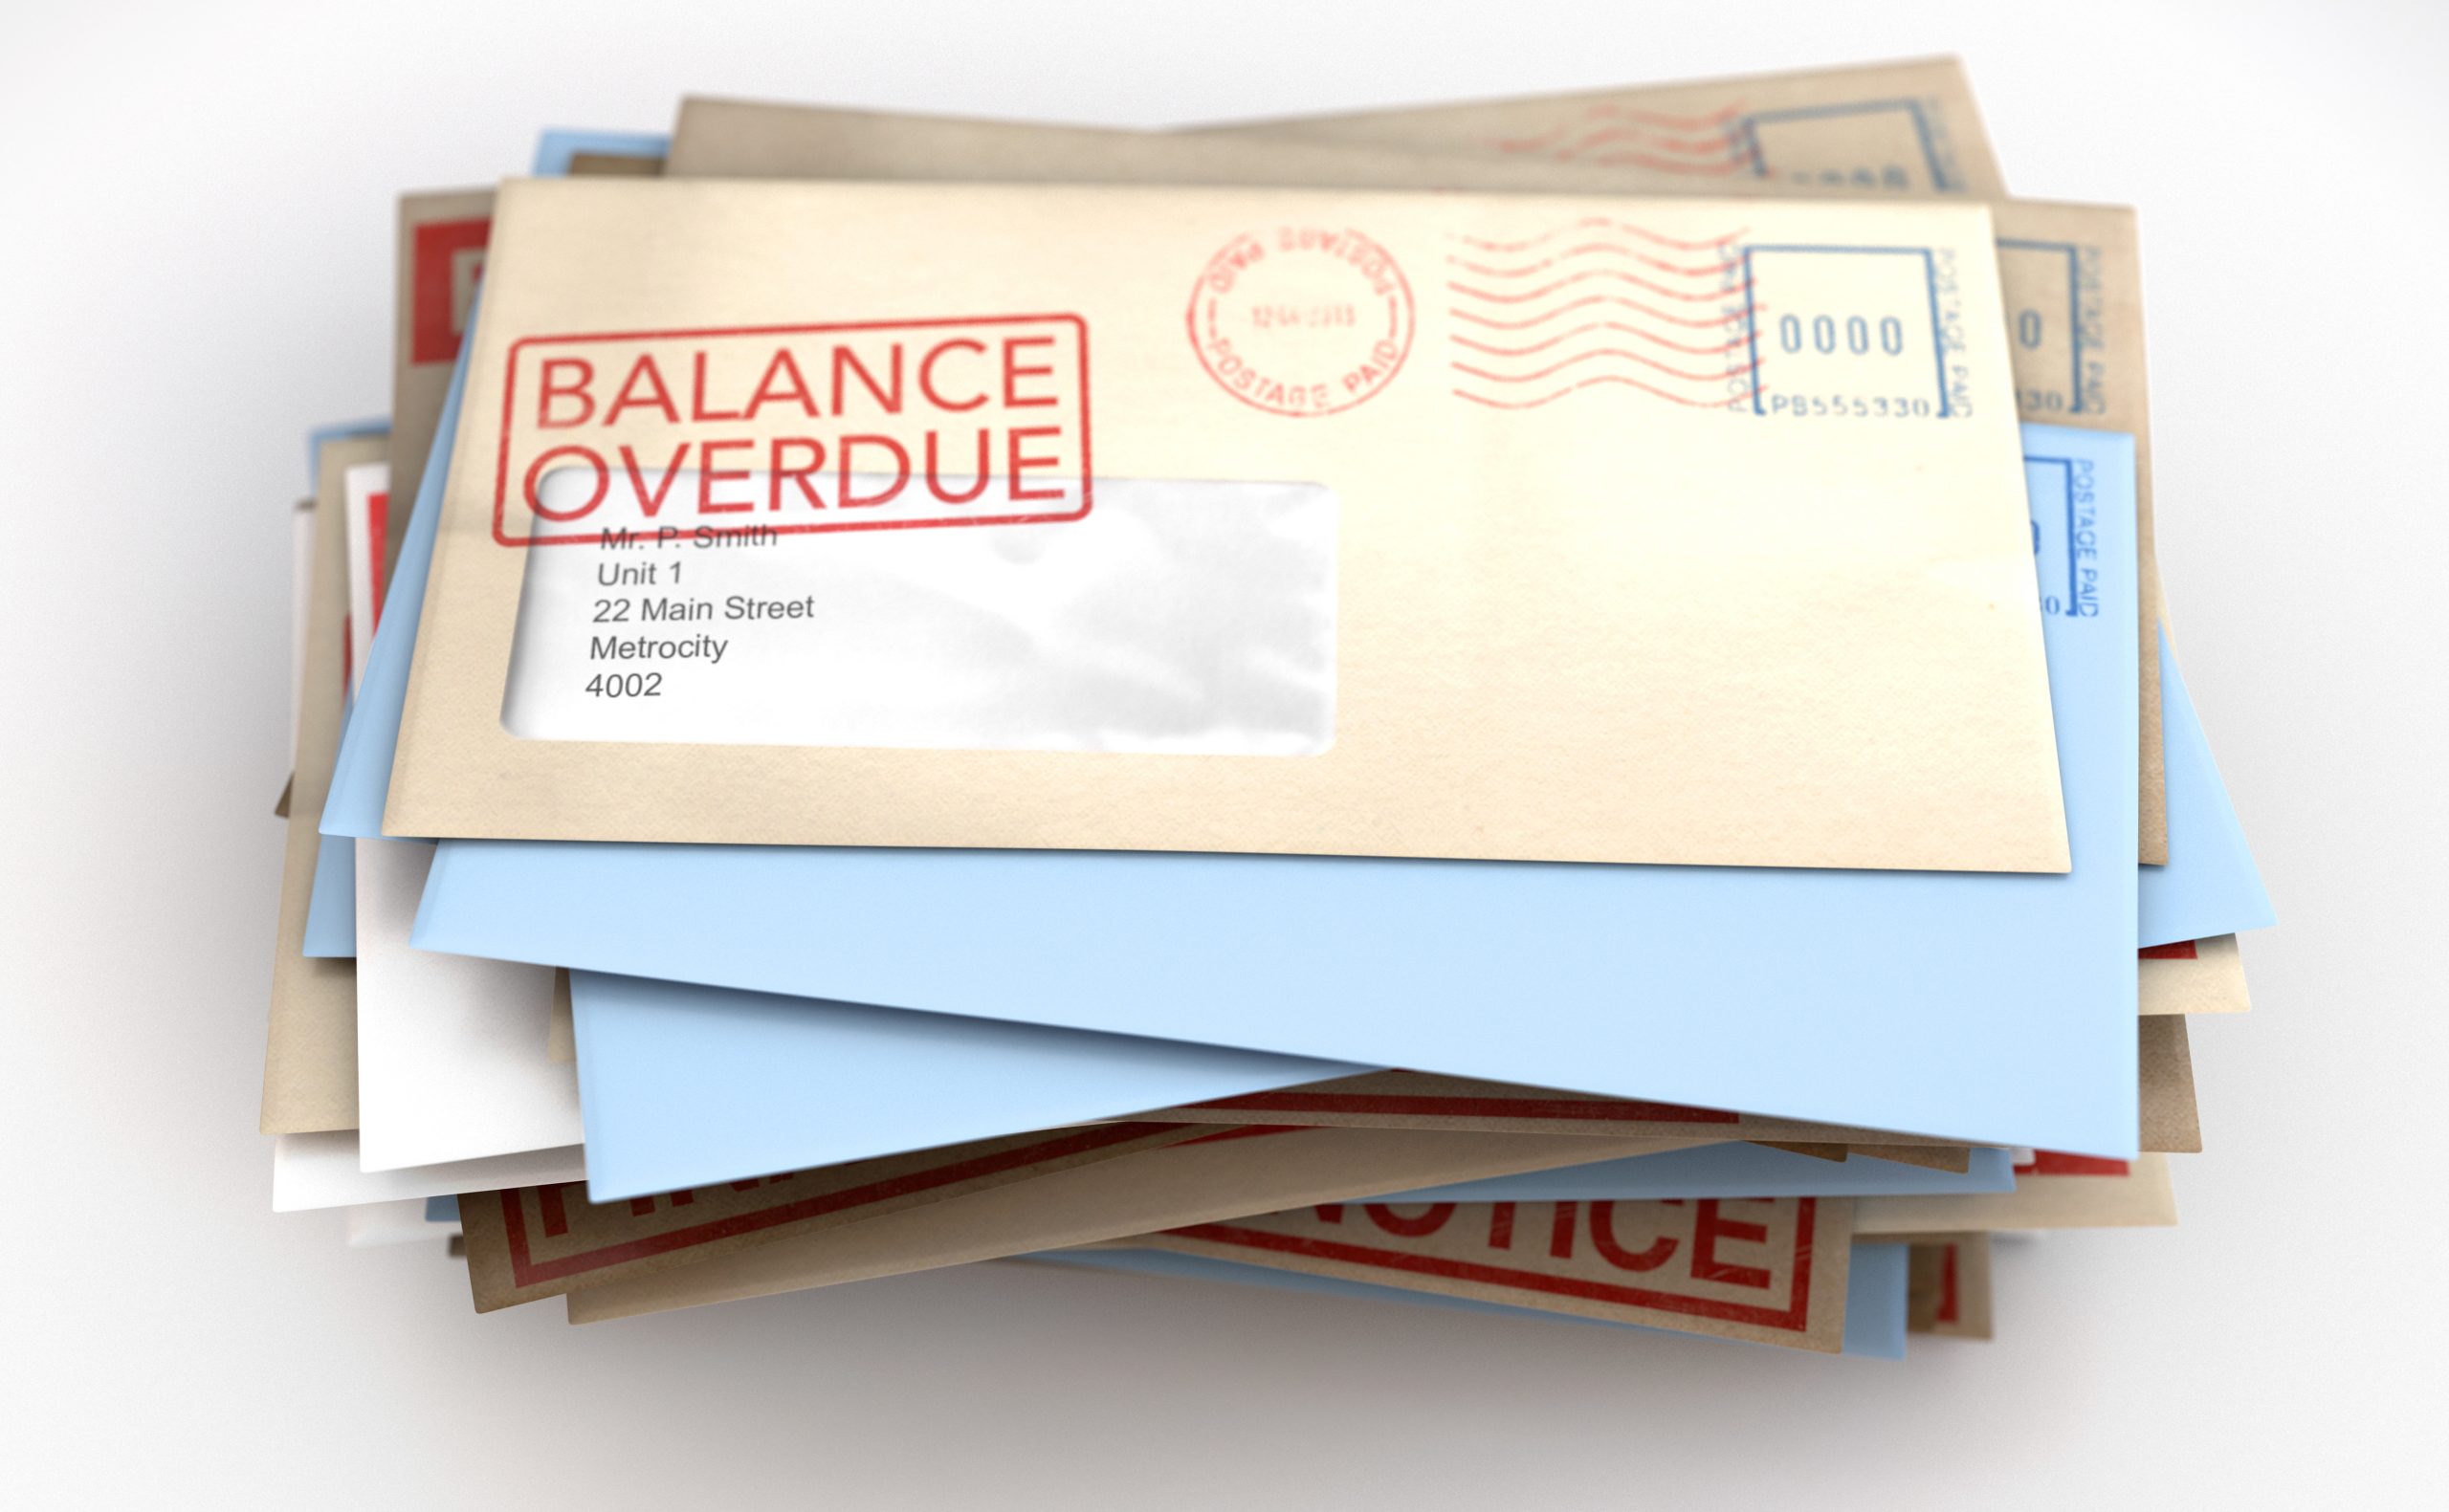 Bills stacked on top of one another with "Balance Overdue" written on the topmost letter.